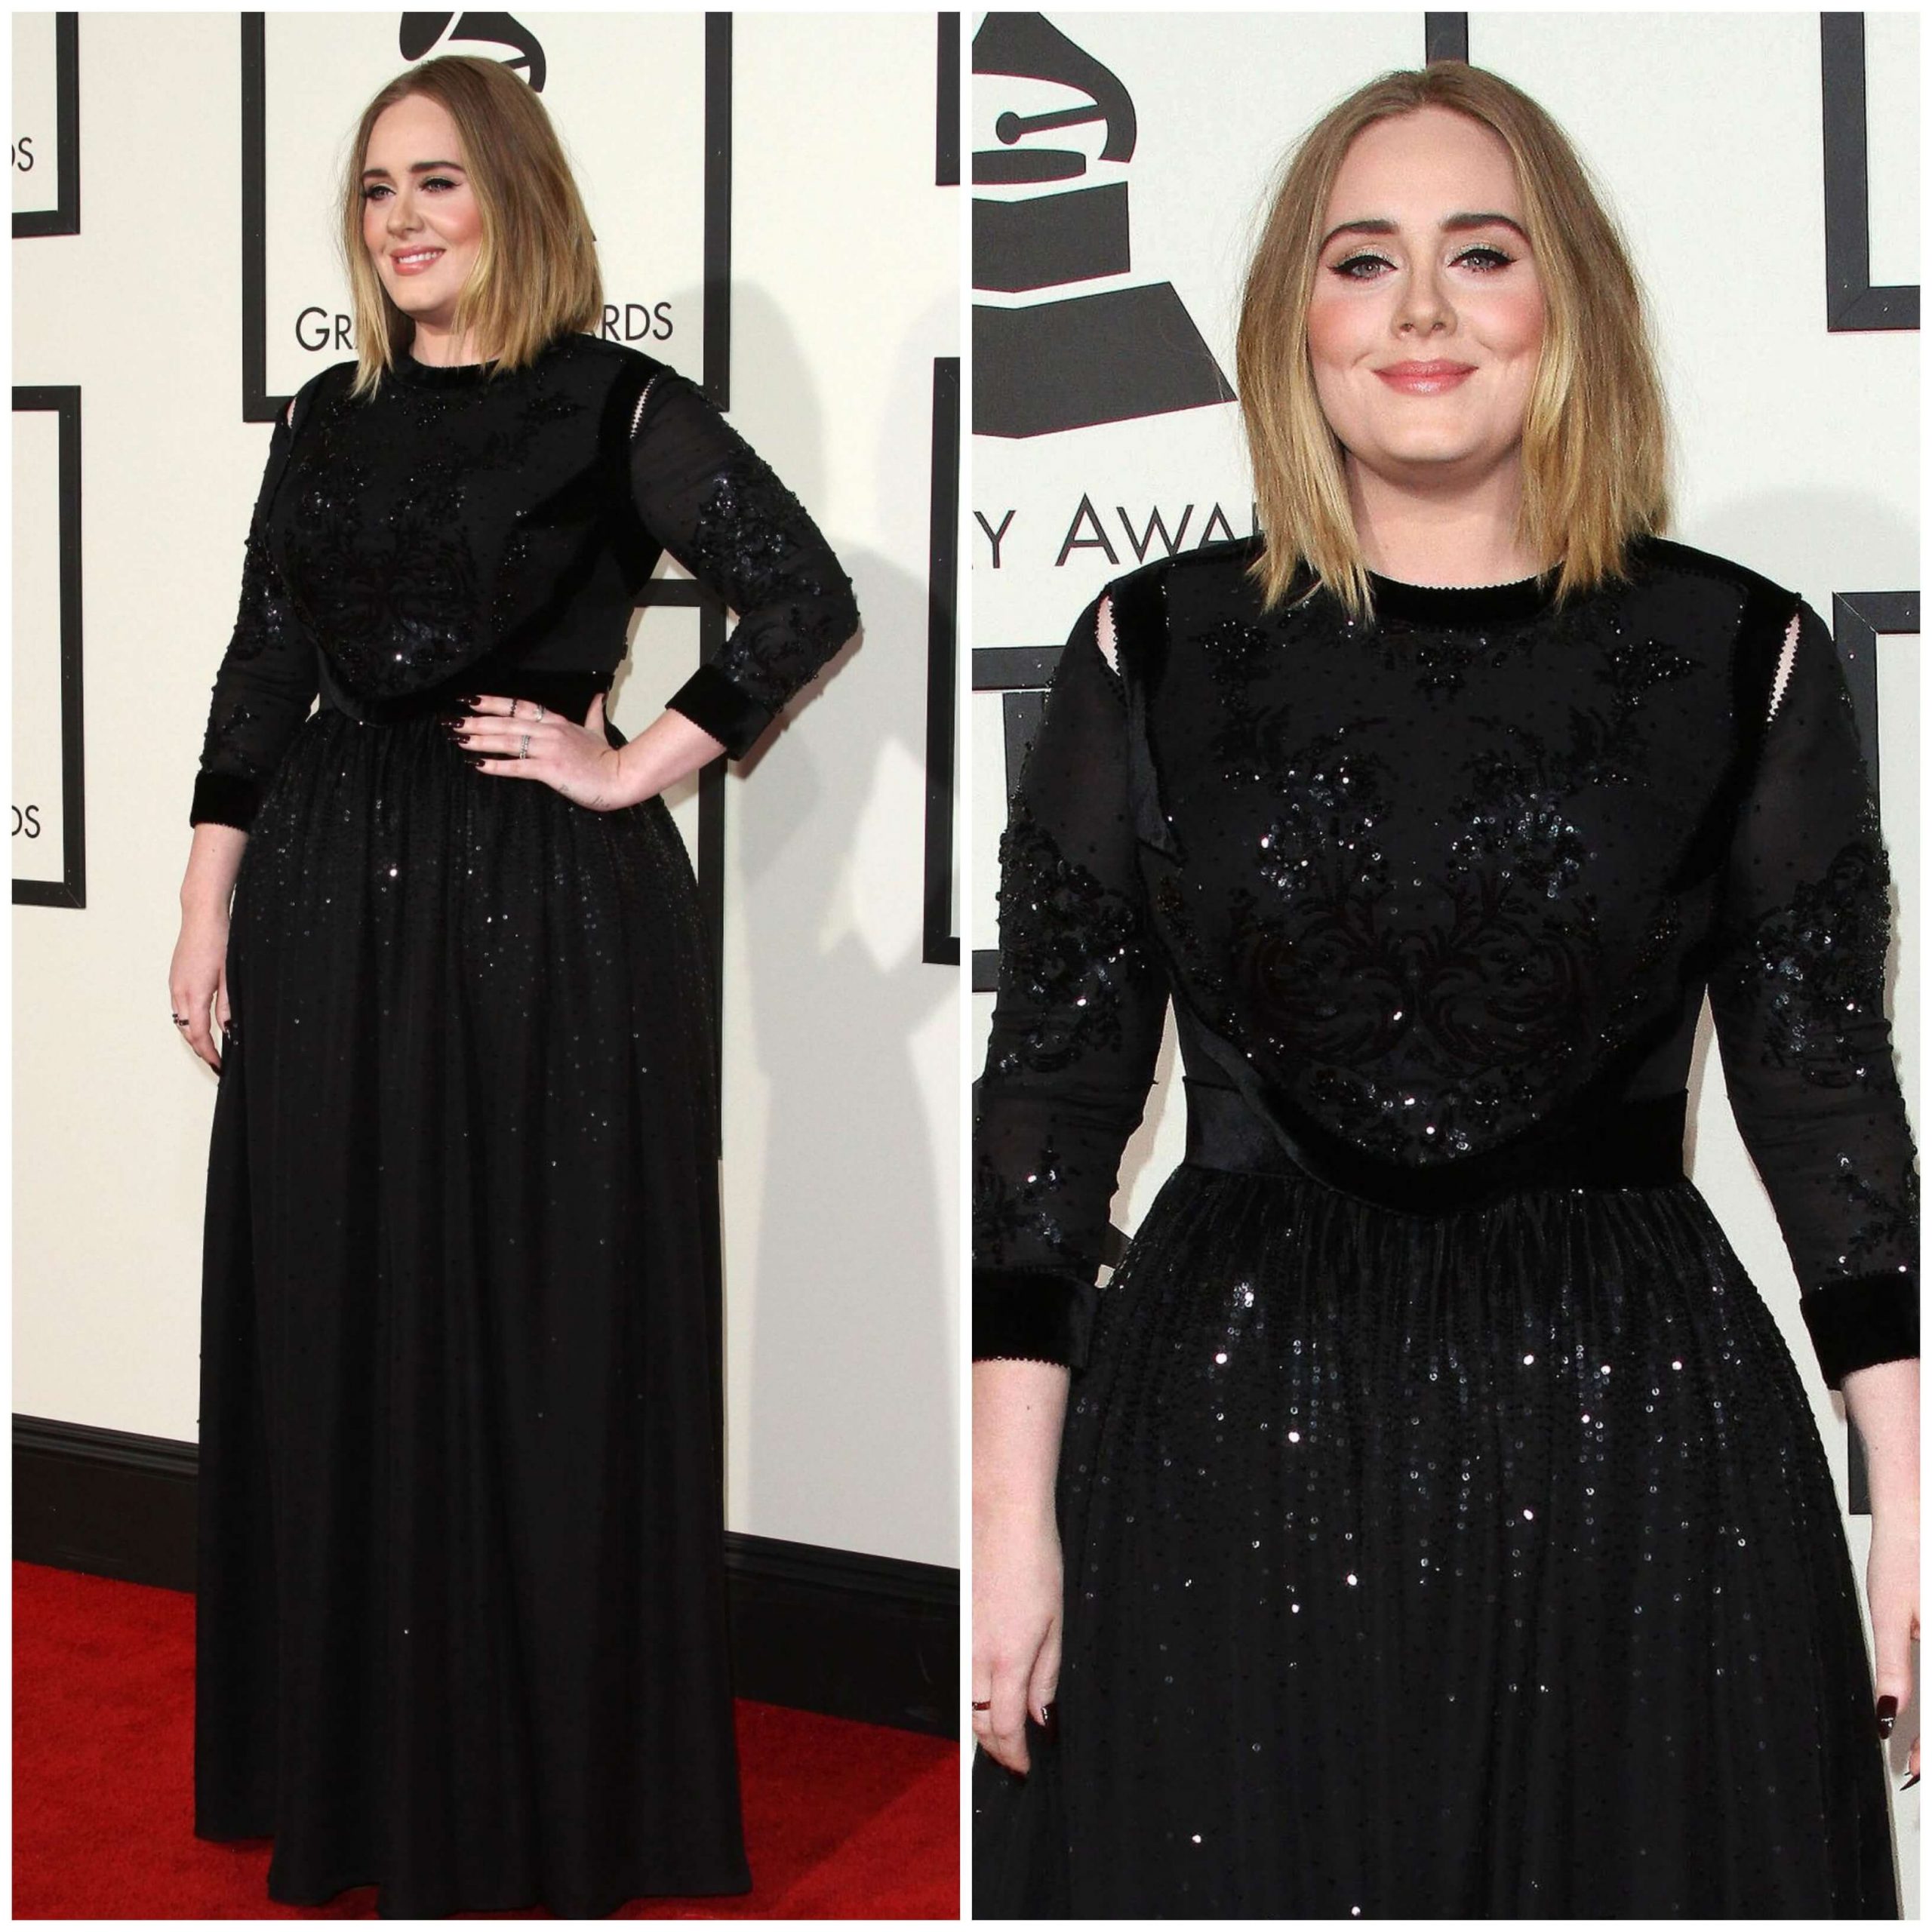 Adele In Beautiful Black Gown At Red Carpet